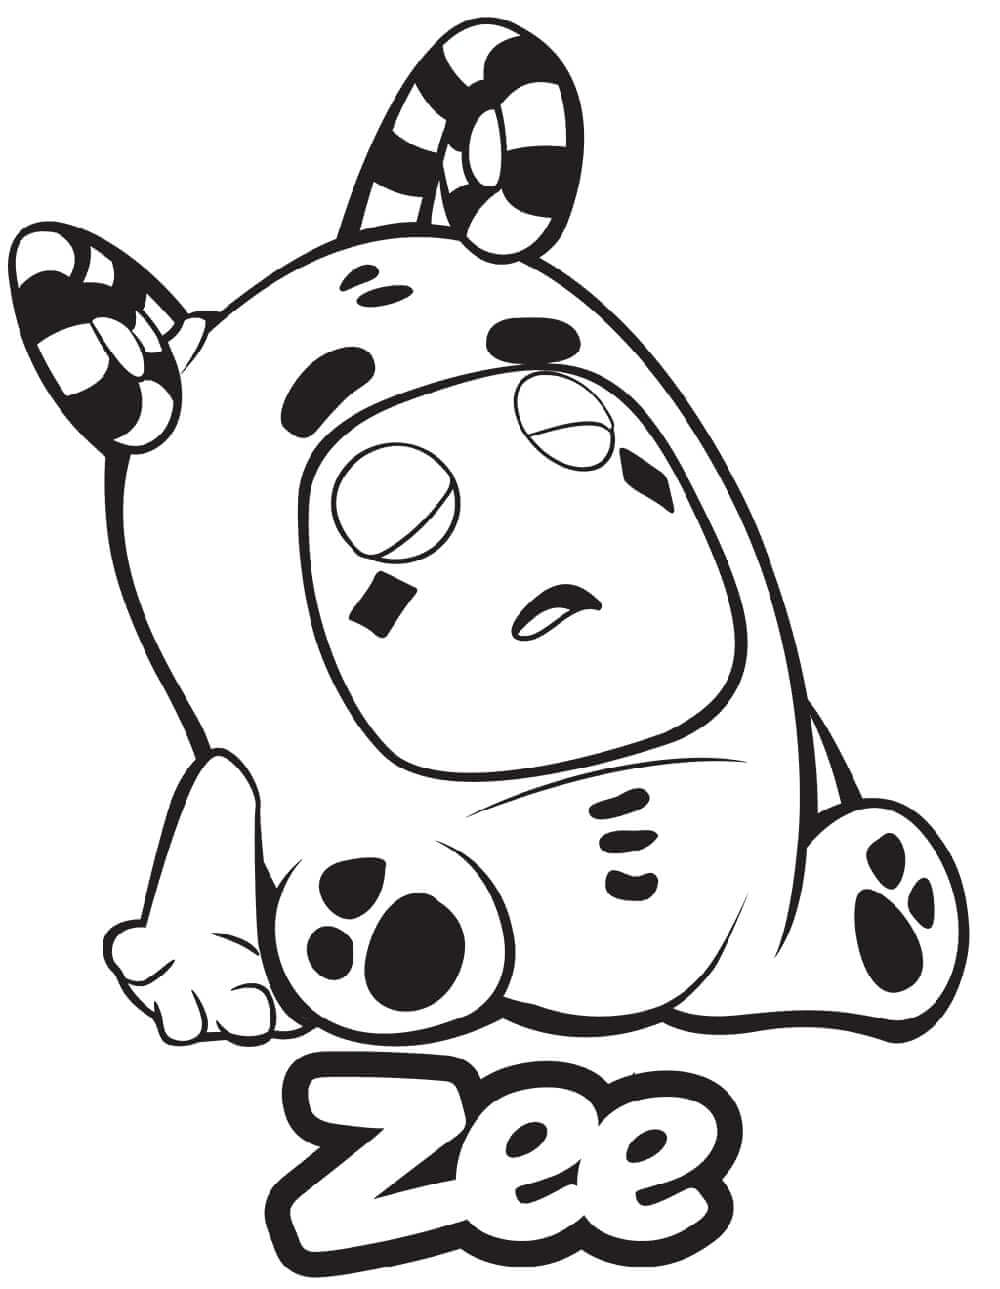 Zee Oddbods Coloring Page - Free Printable Coloring Pages ...